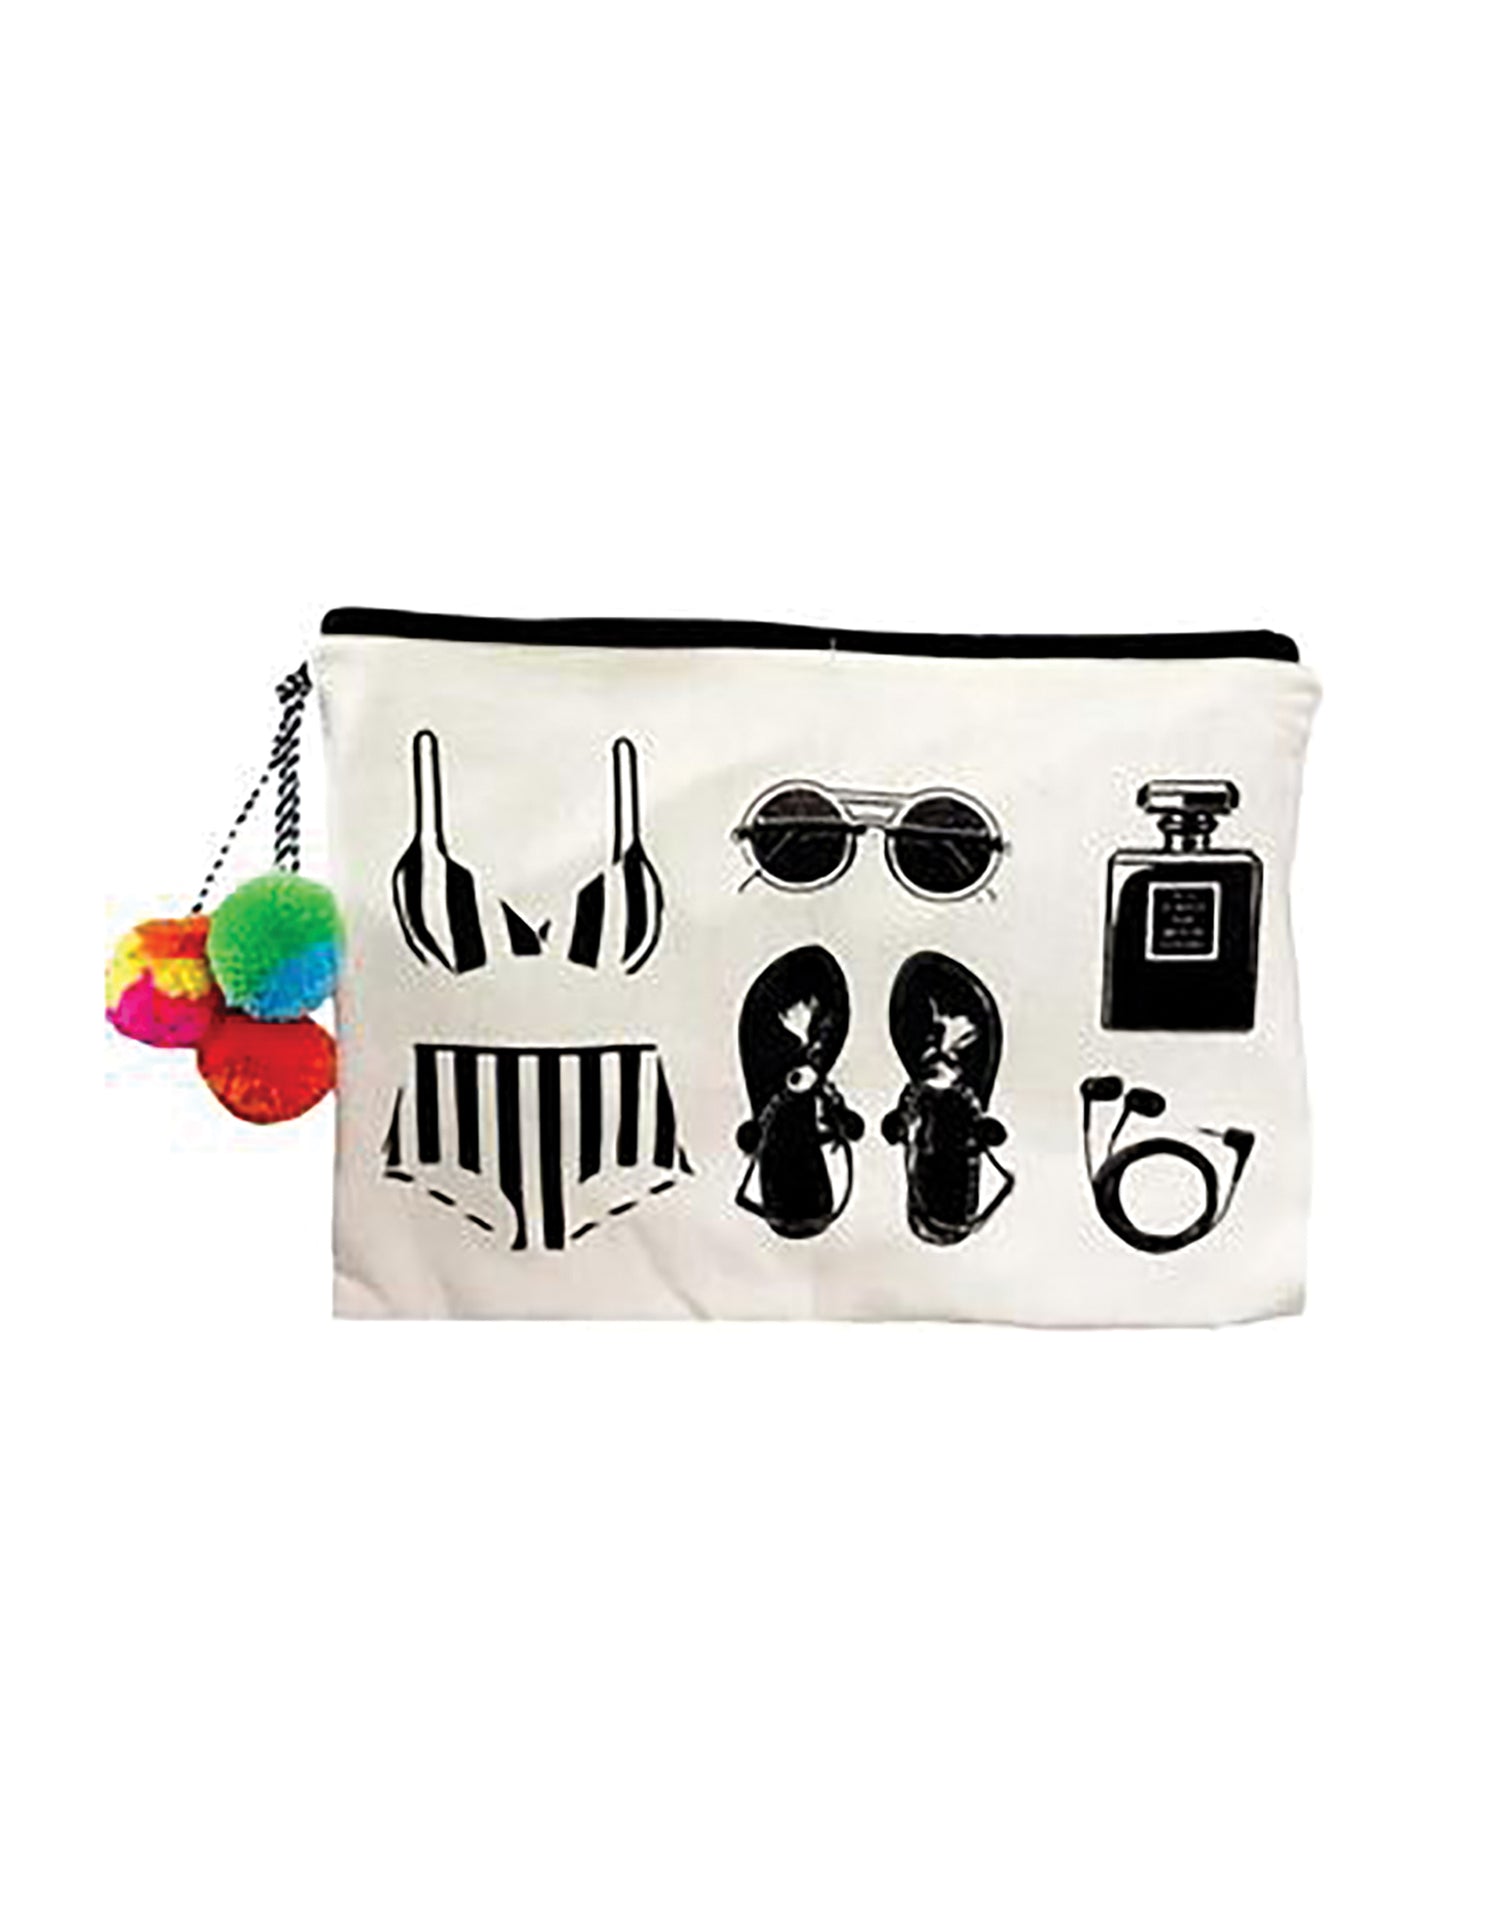 Beach Pouch in White - Product View